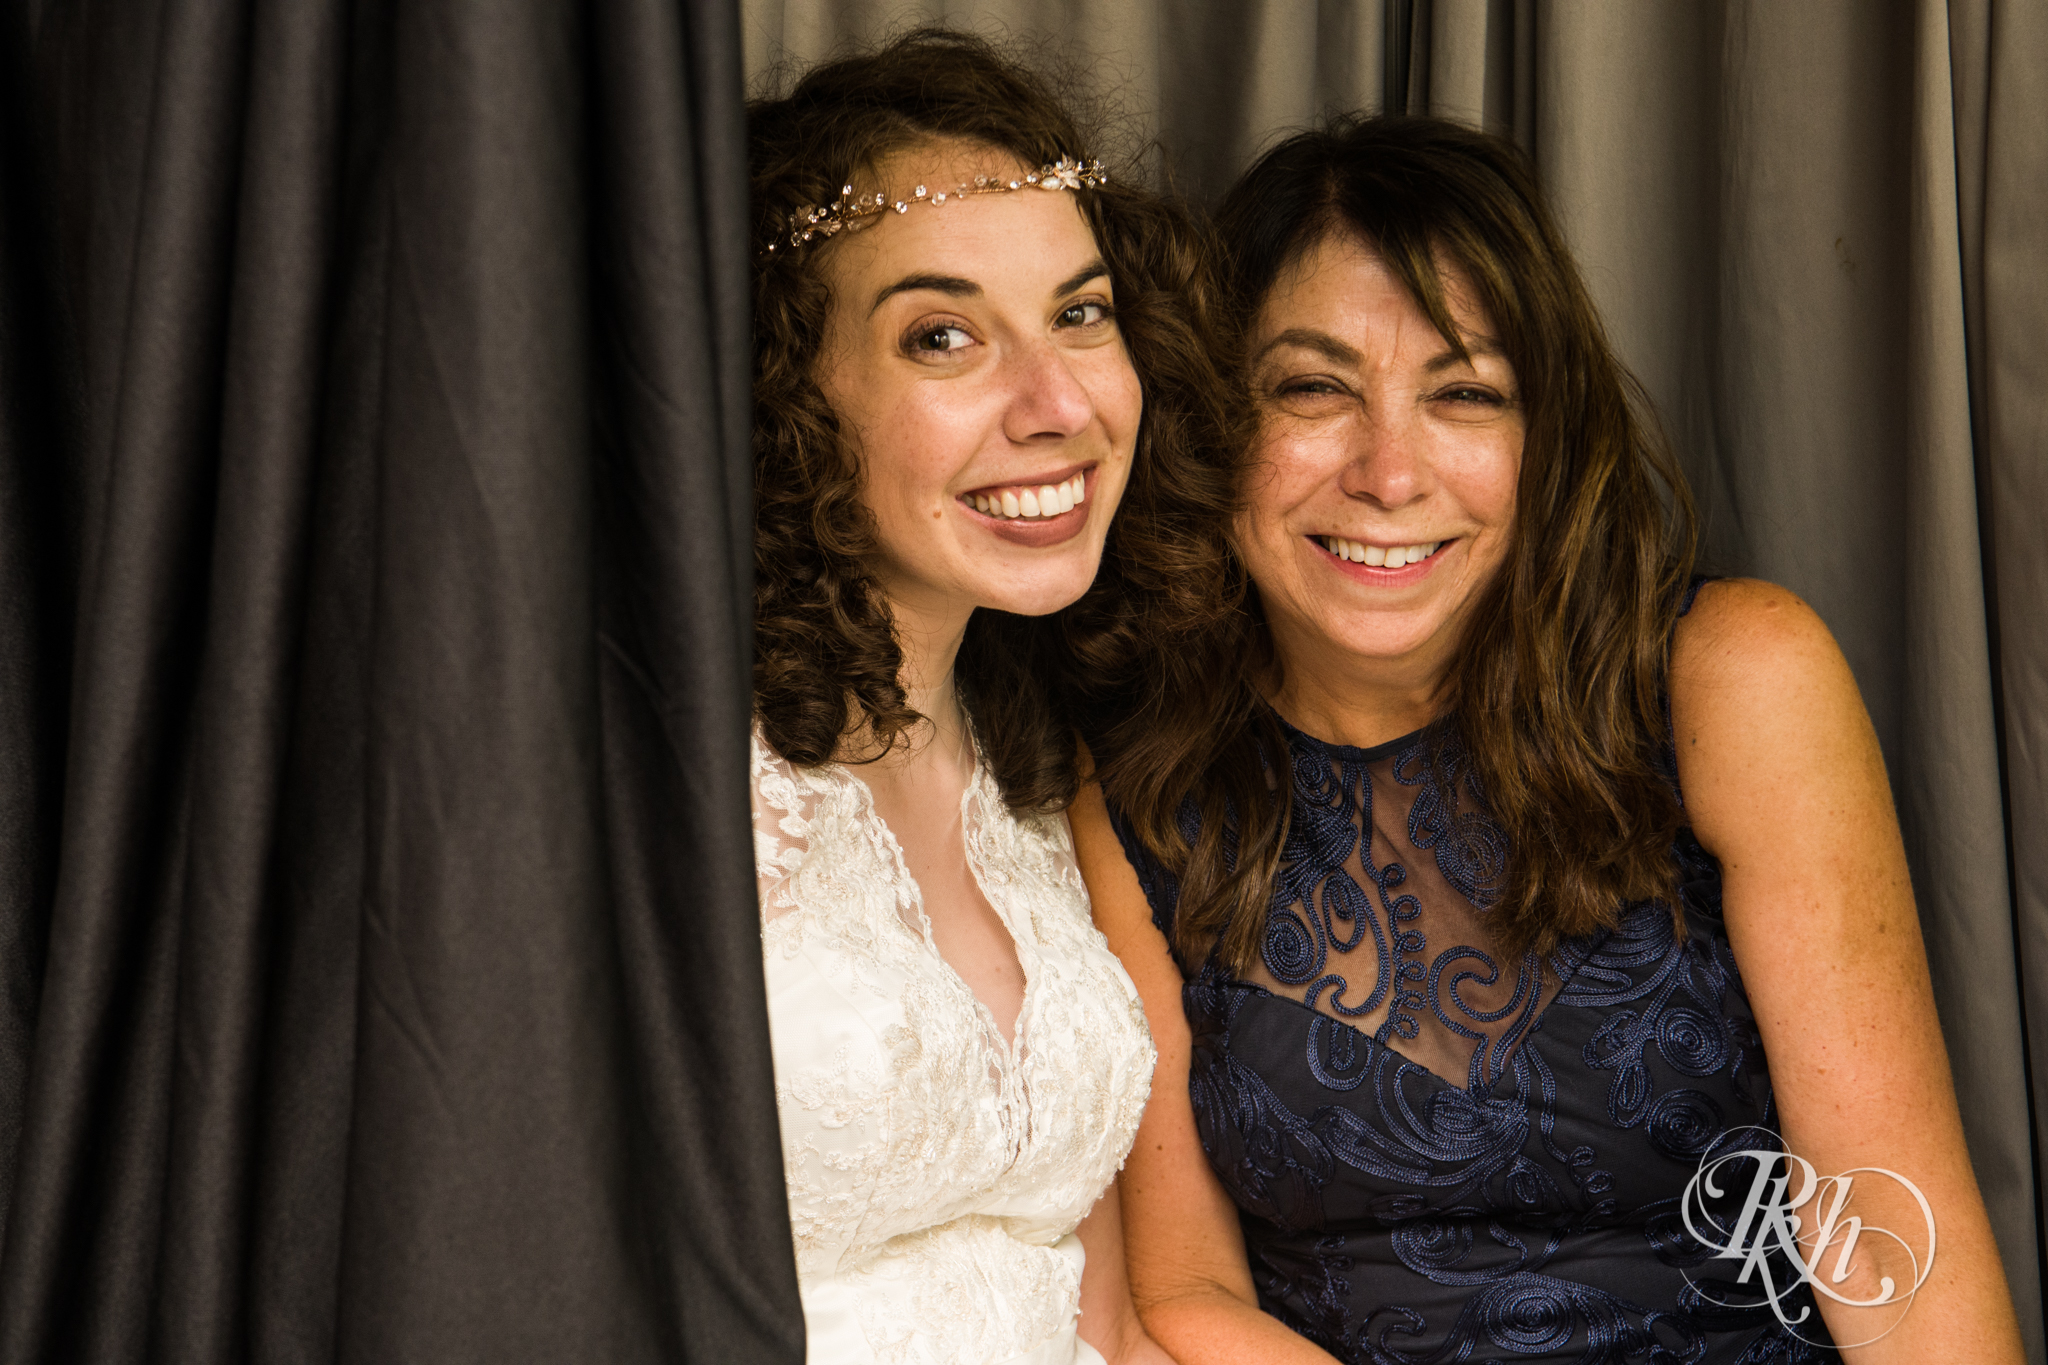 Bride smiles with mom during wedding reception at the Saint Paul Hotel in Saint Paul, Minnesota.